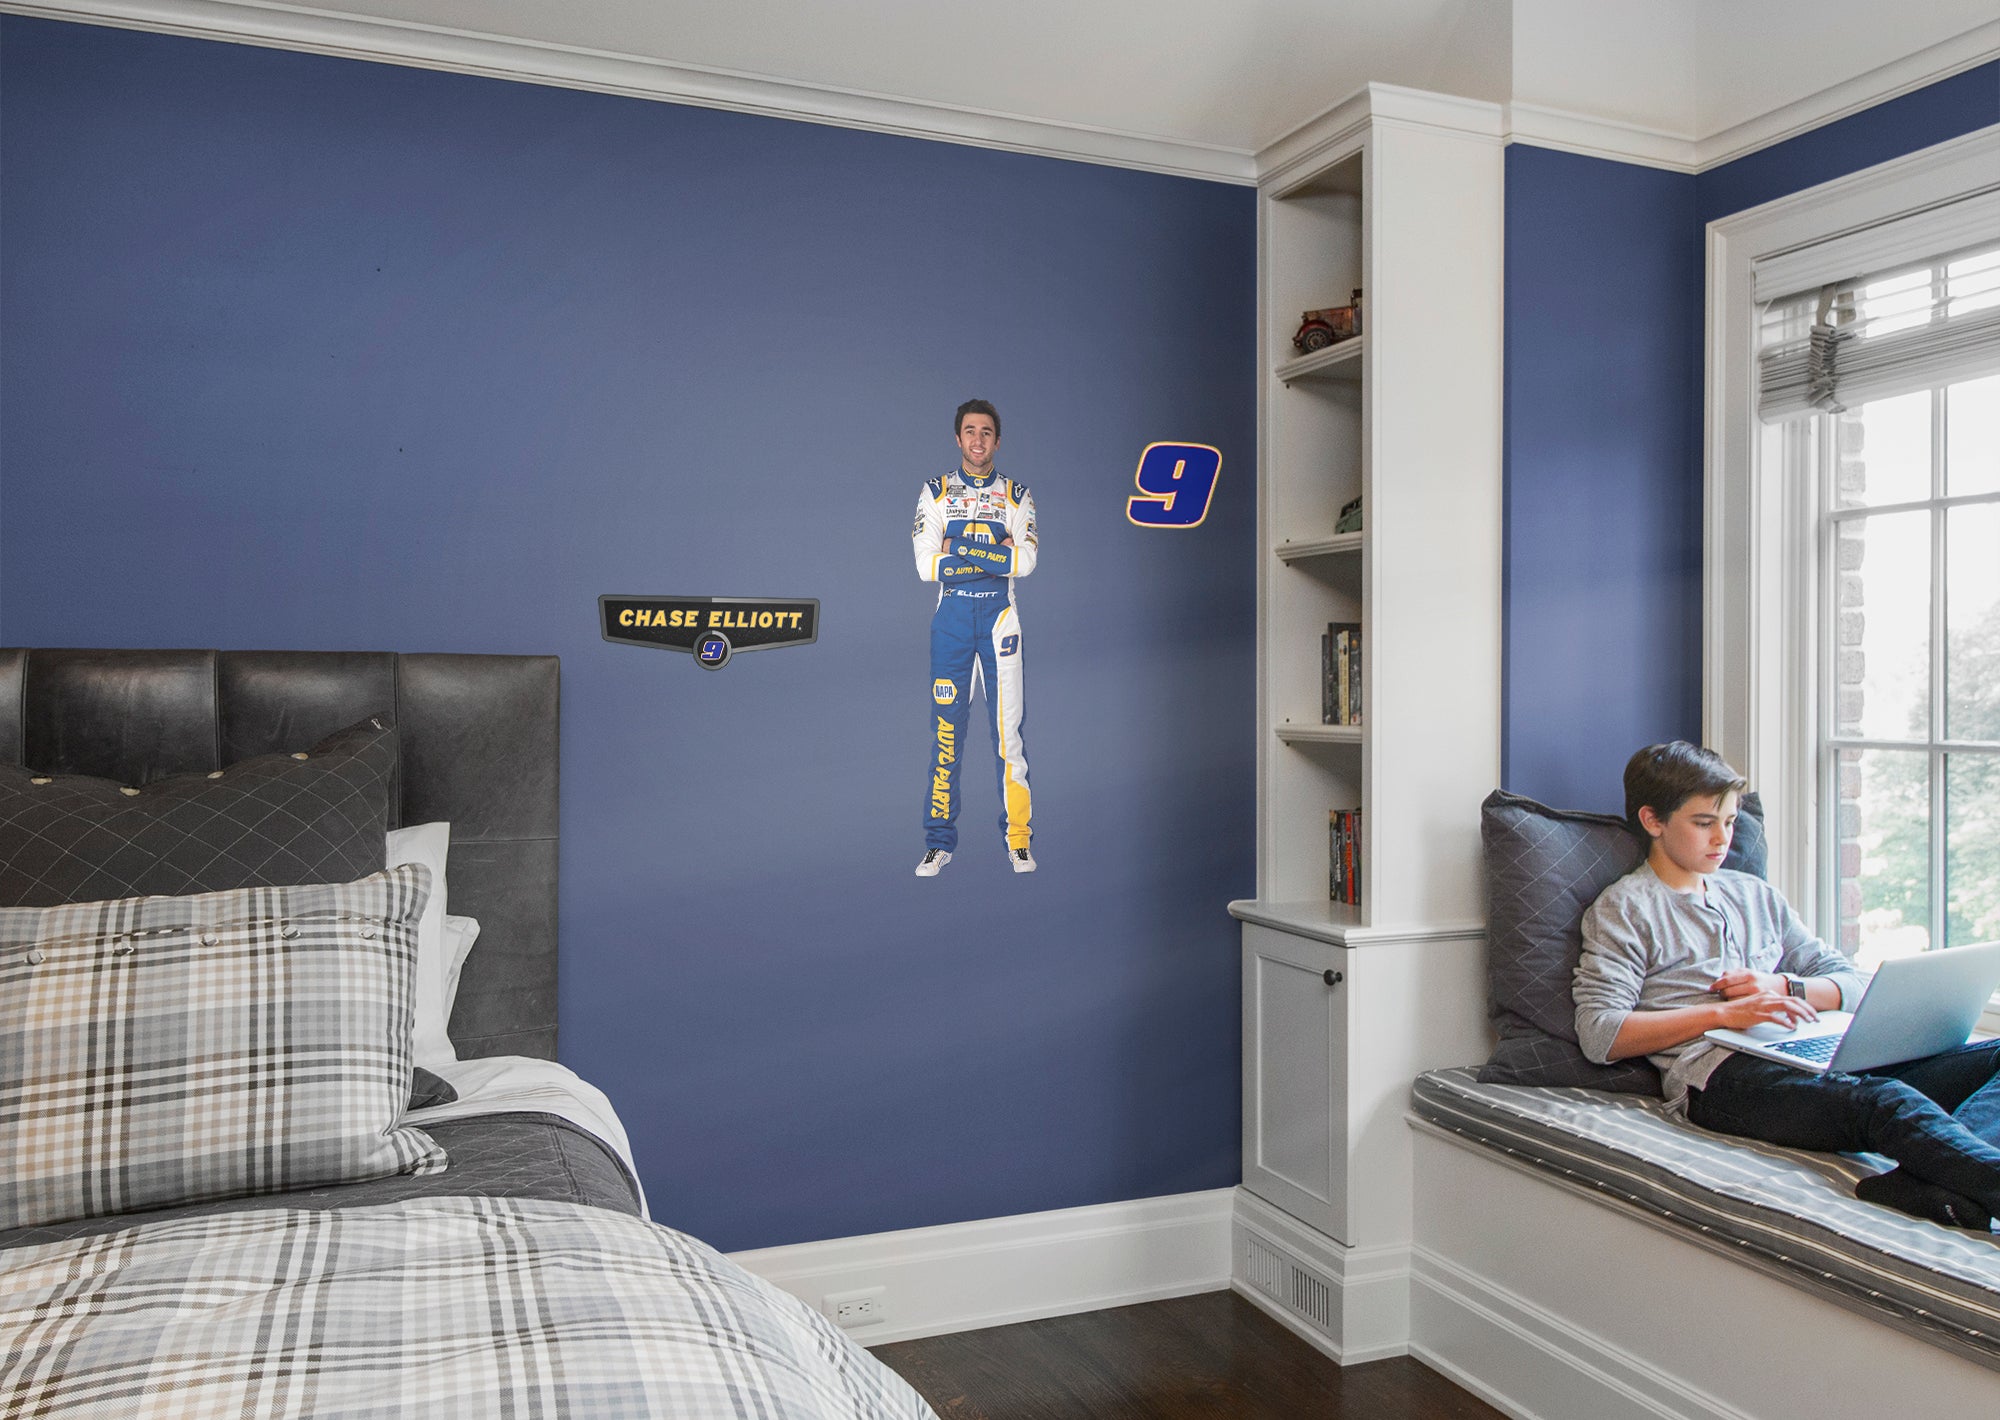 Chase Elliott 2021 Driver - Officially Licensed NASCAR Removable Wall Decal XL by Fathead | Vinyl